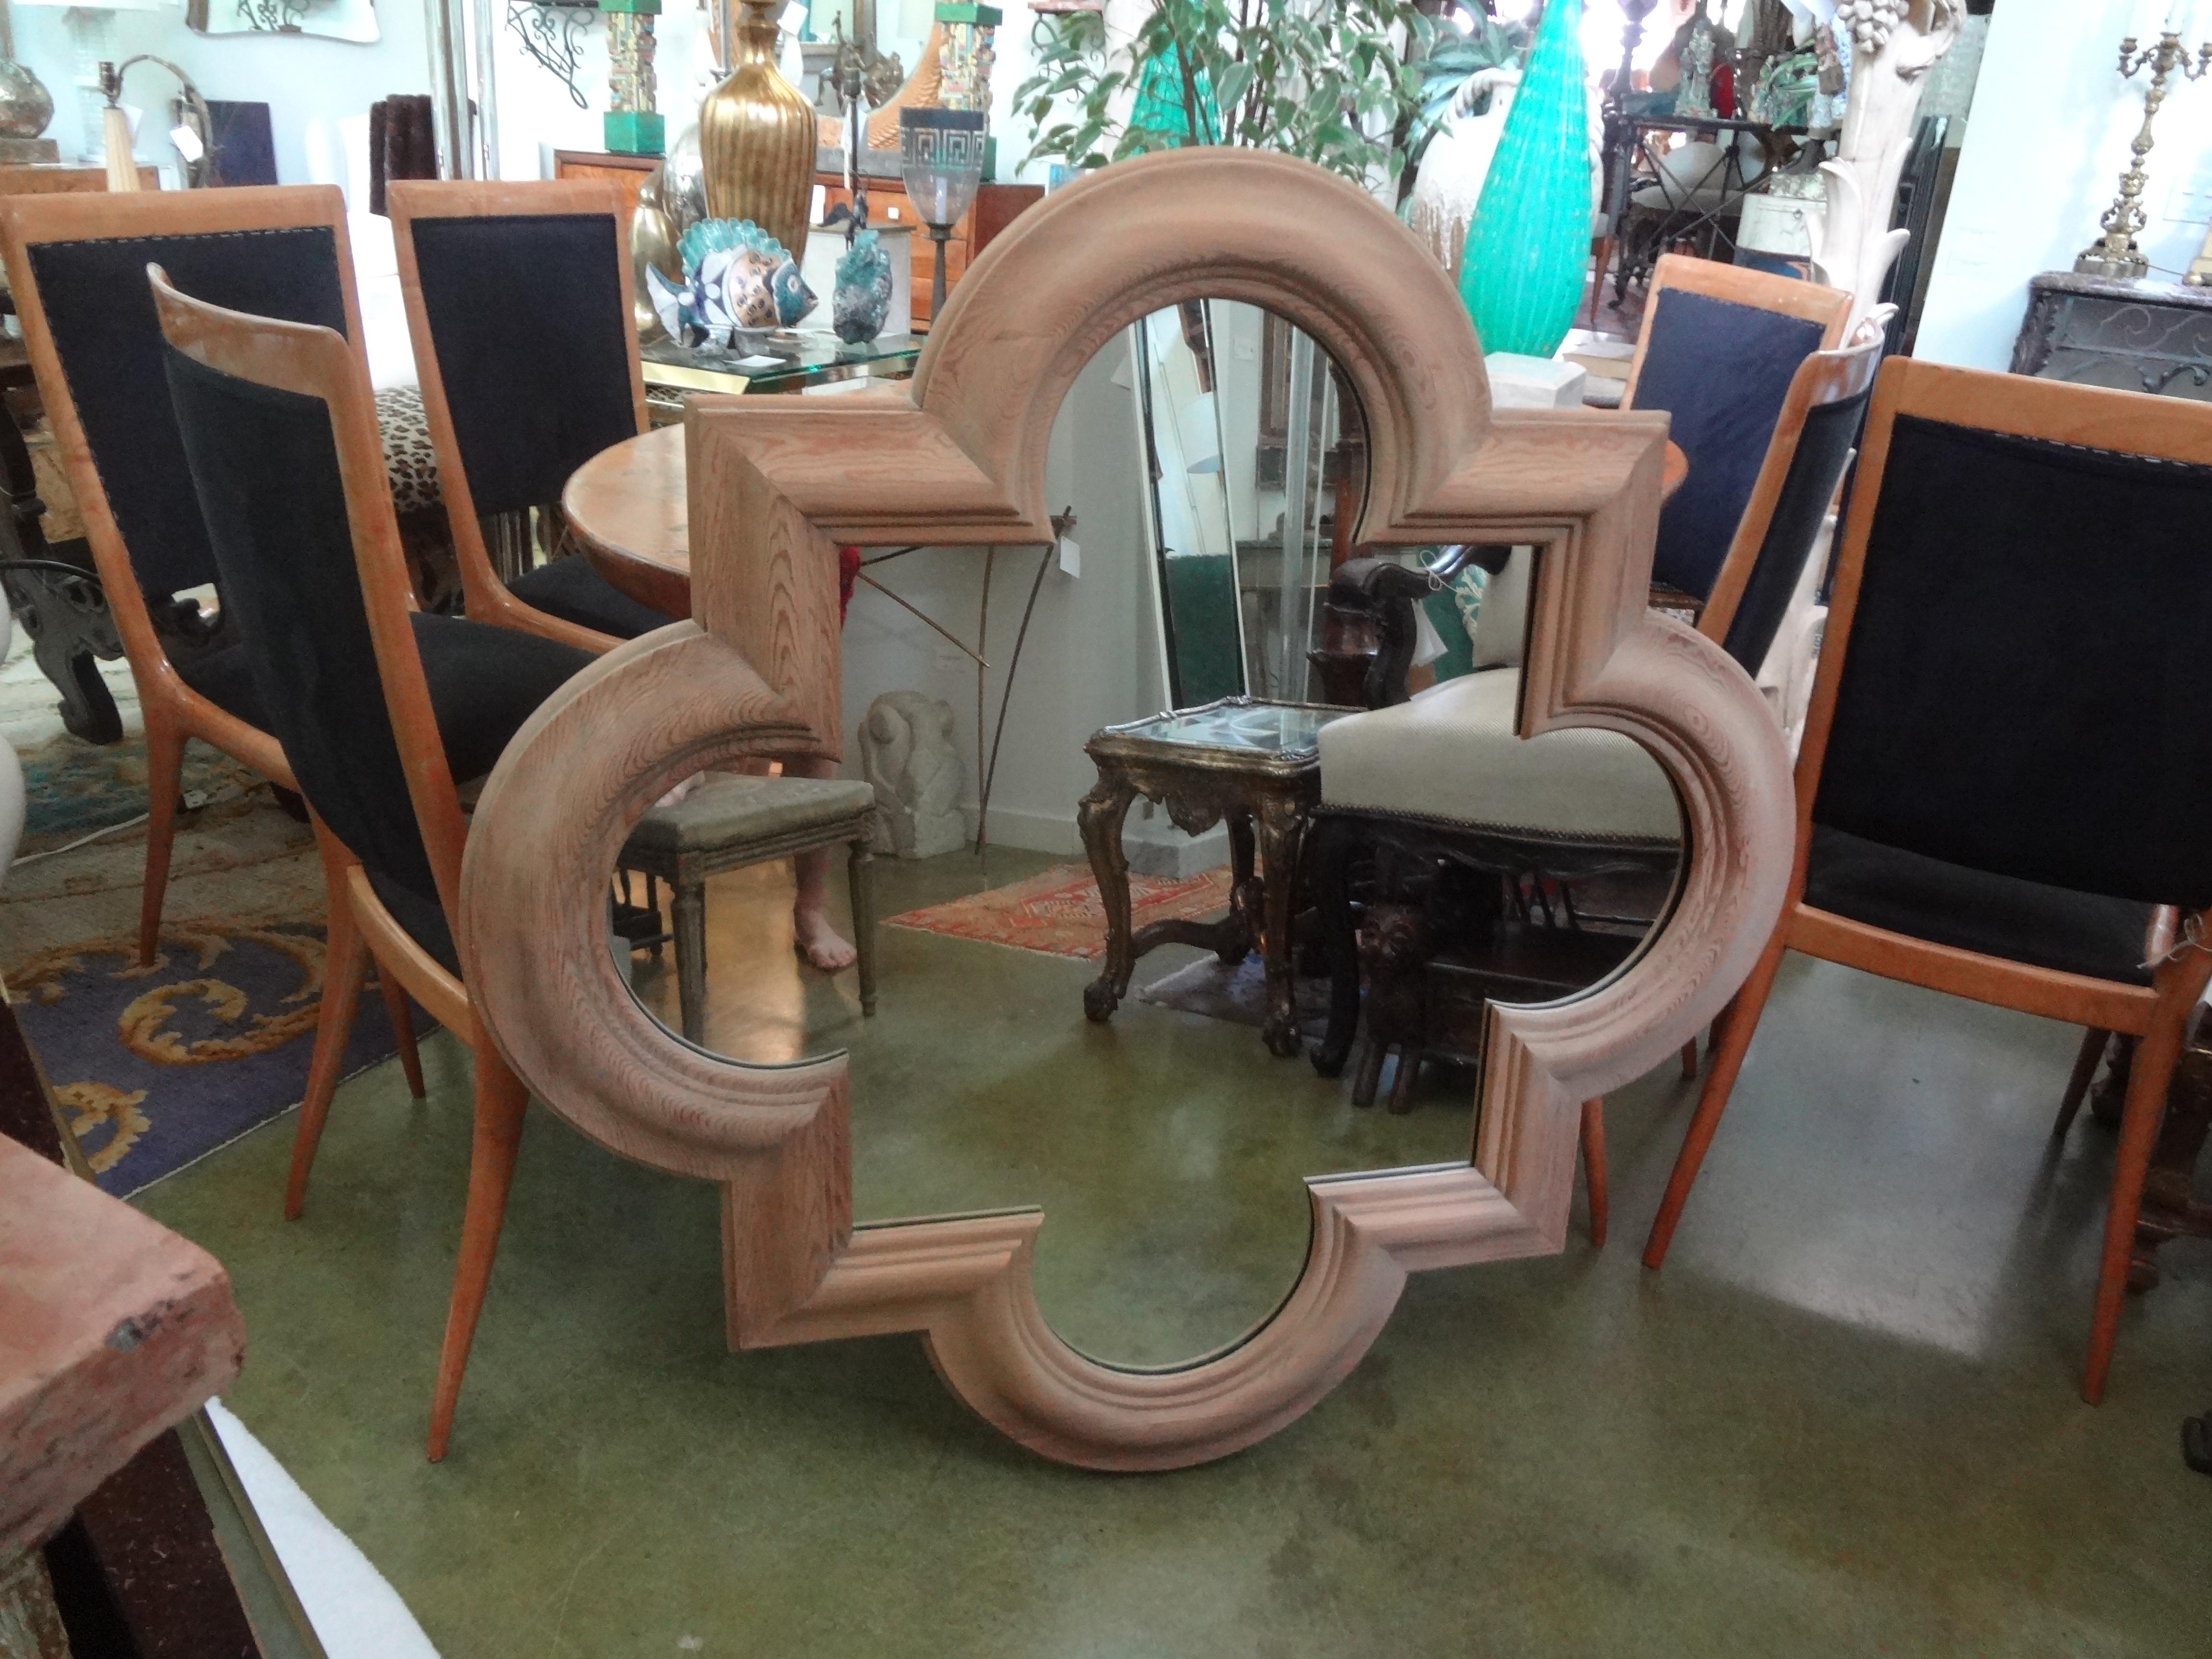 Large Italian quatrefoil wood mirror.
Stunning large Italian quatrefoil mirror of solid oak. This beautifully carved well-made oak mirror dates to the 1970s and is in great condition. This vintage Italian mirror could be gilded, cerused, lacquered